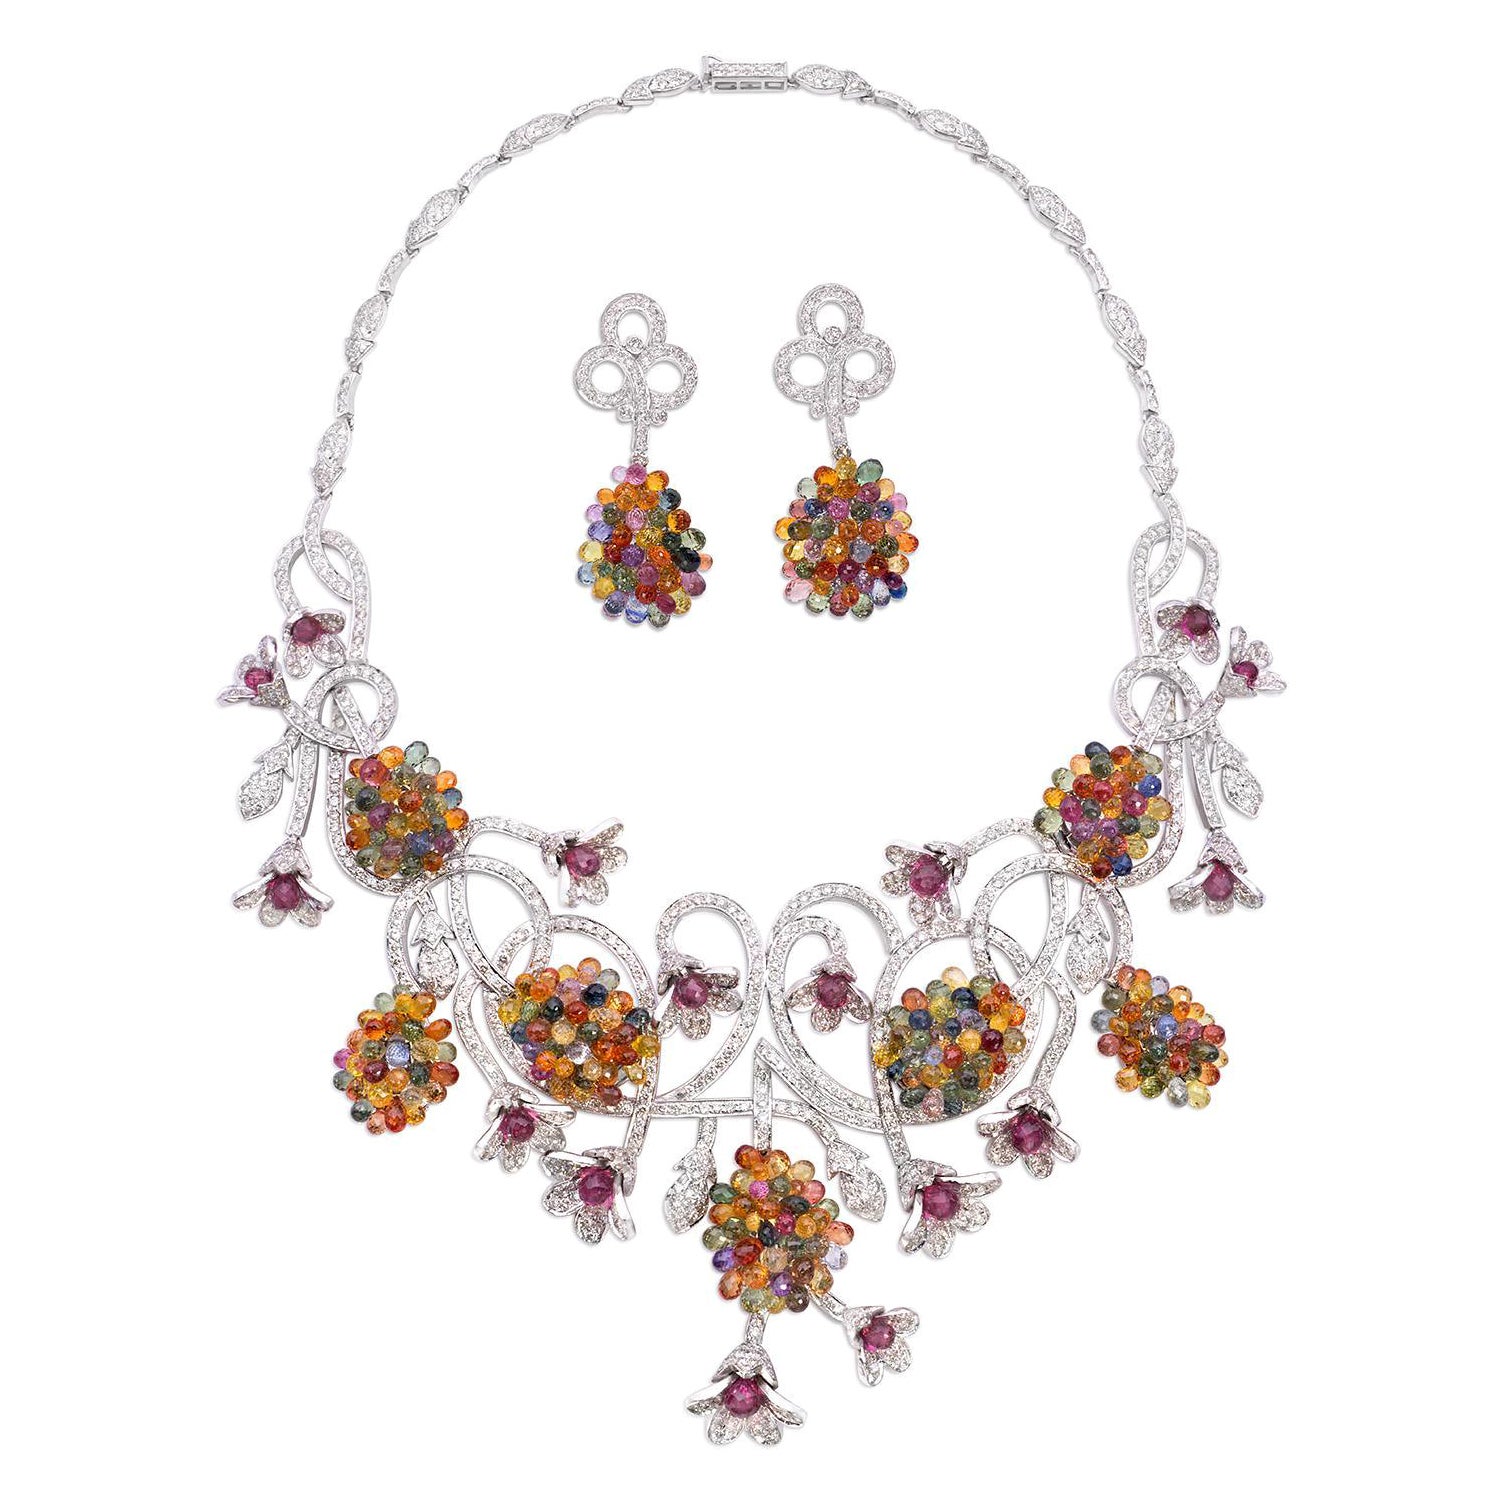 56 Carat Multi-Colored Sapphire and Diamond Necklace and Earring Set